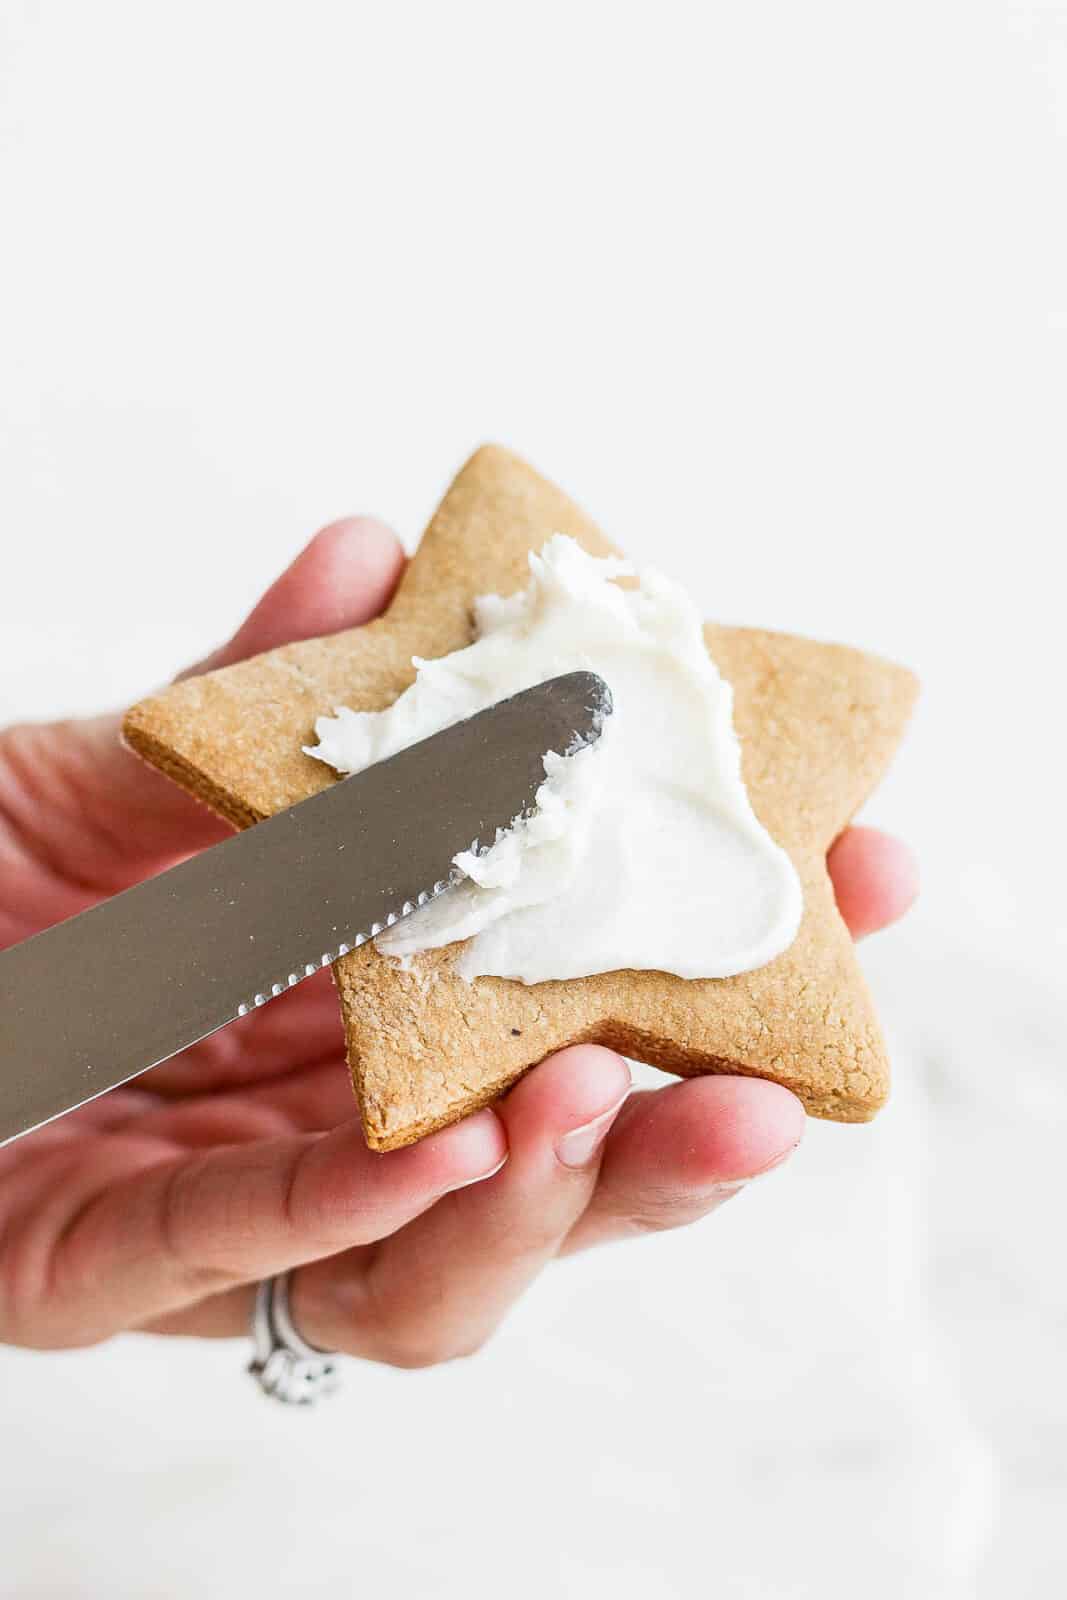 A knife putting dairy free frosting on a cut-out cookie.